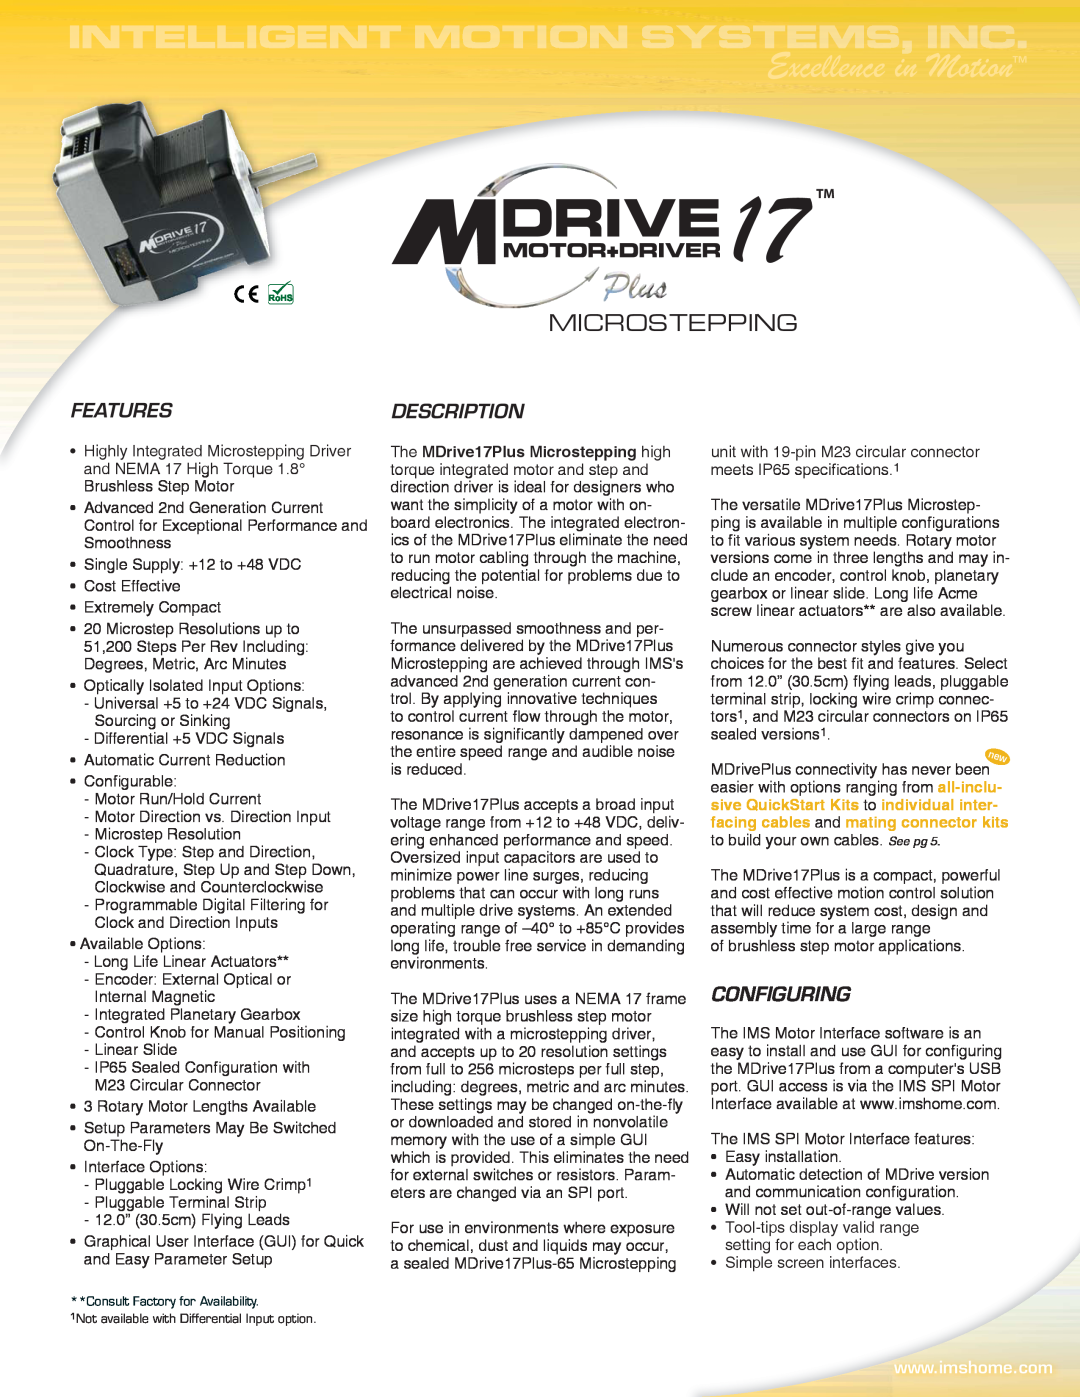 Intelligent Motion Systems MDM17Plus specifications Microstepping, Features, Description, Configuring, 17 TM 